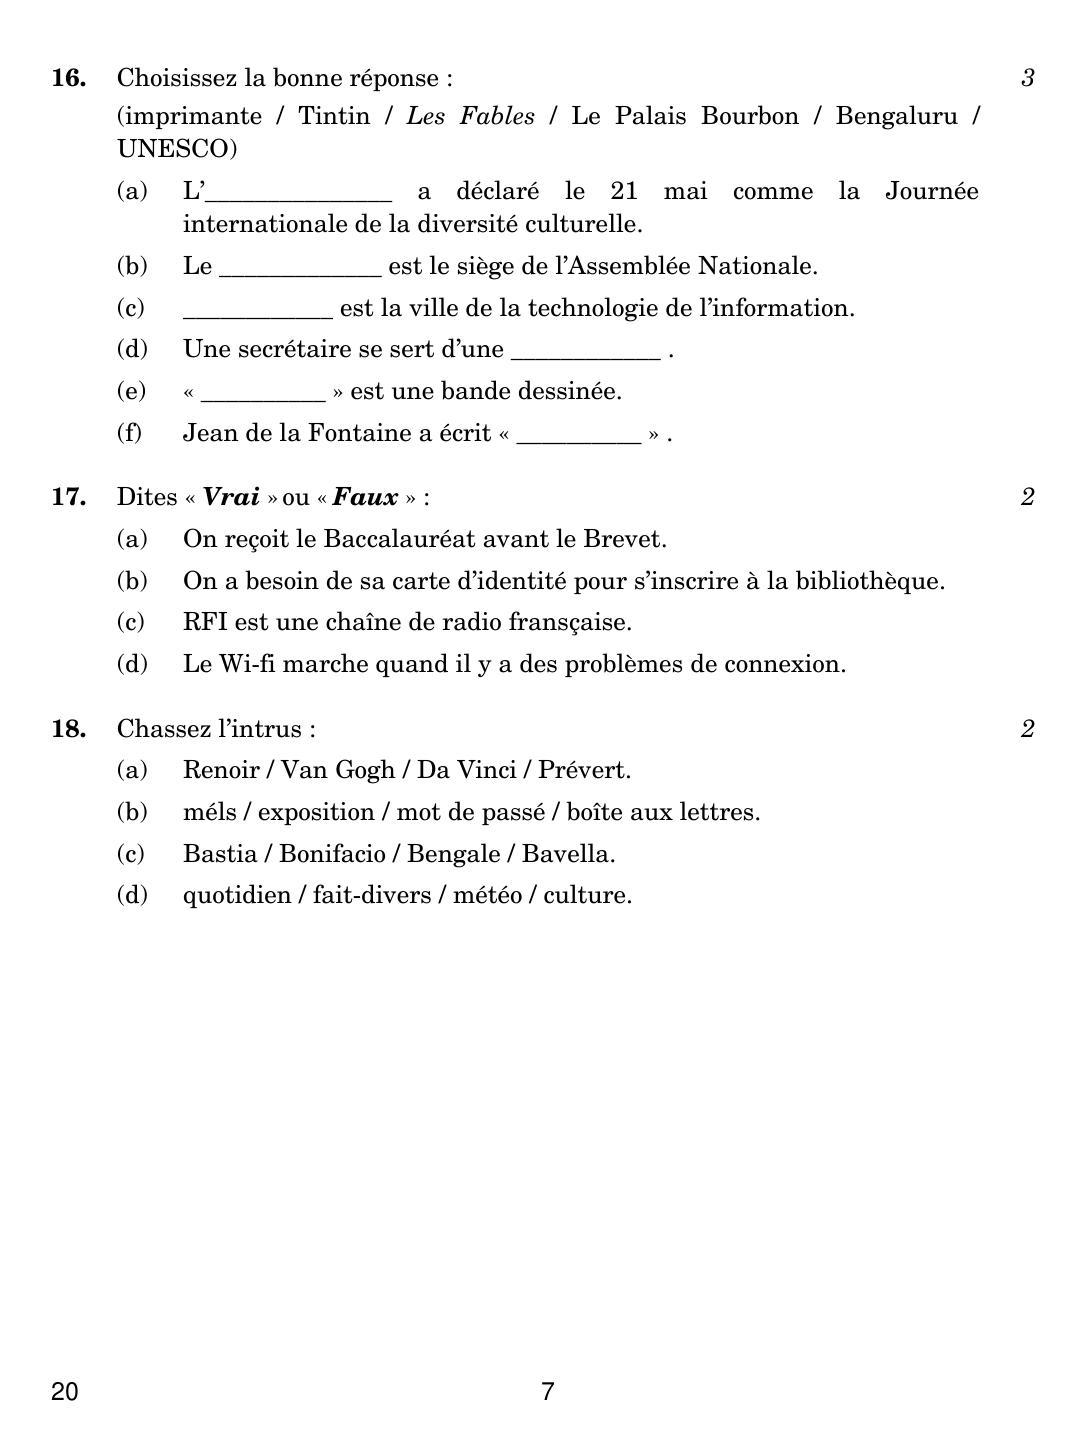 CBSE Class 10 20 French 2019 Compartment Question Paper - Page 7